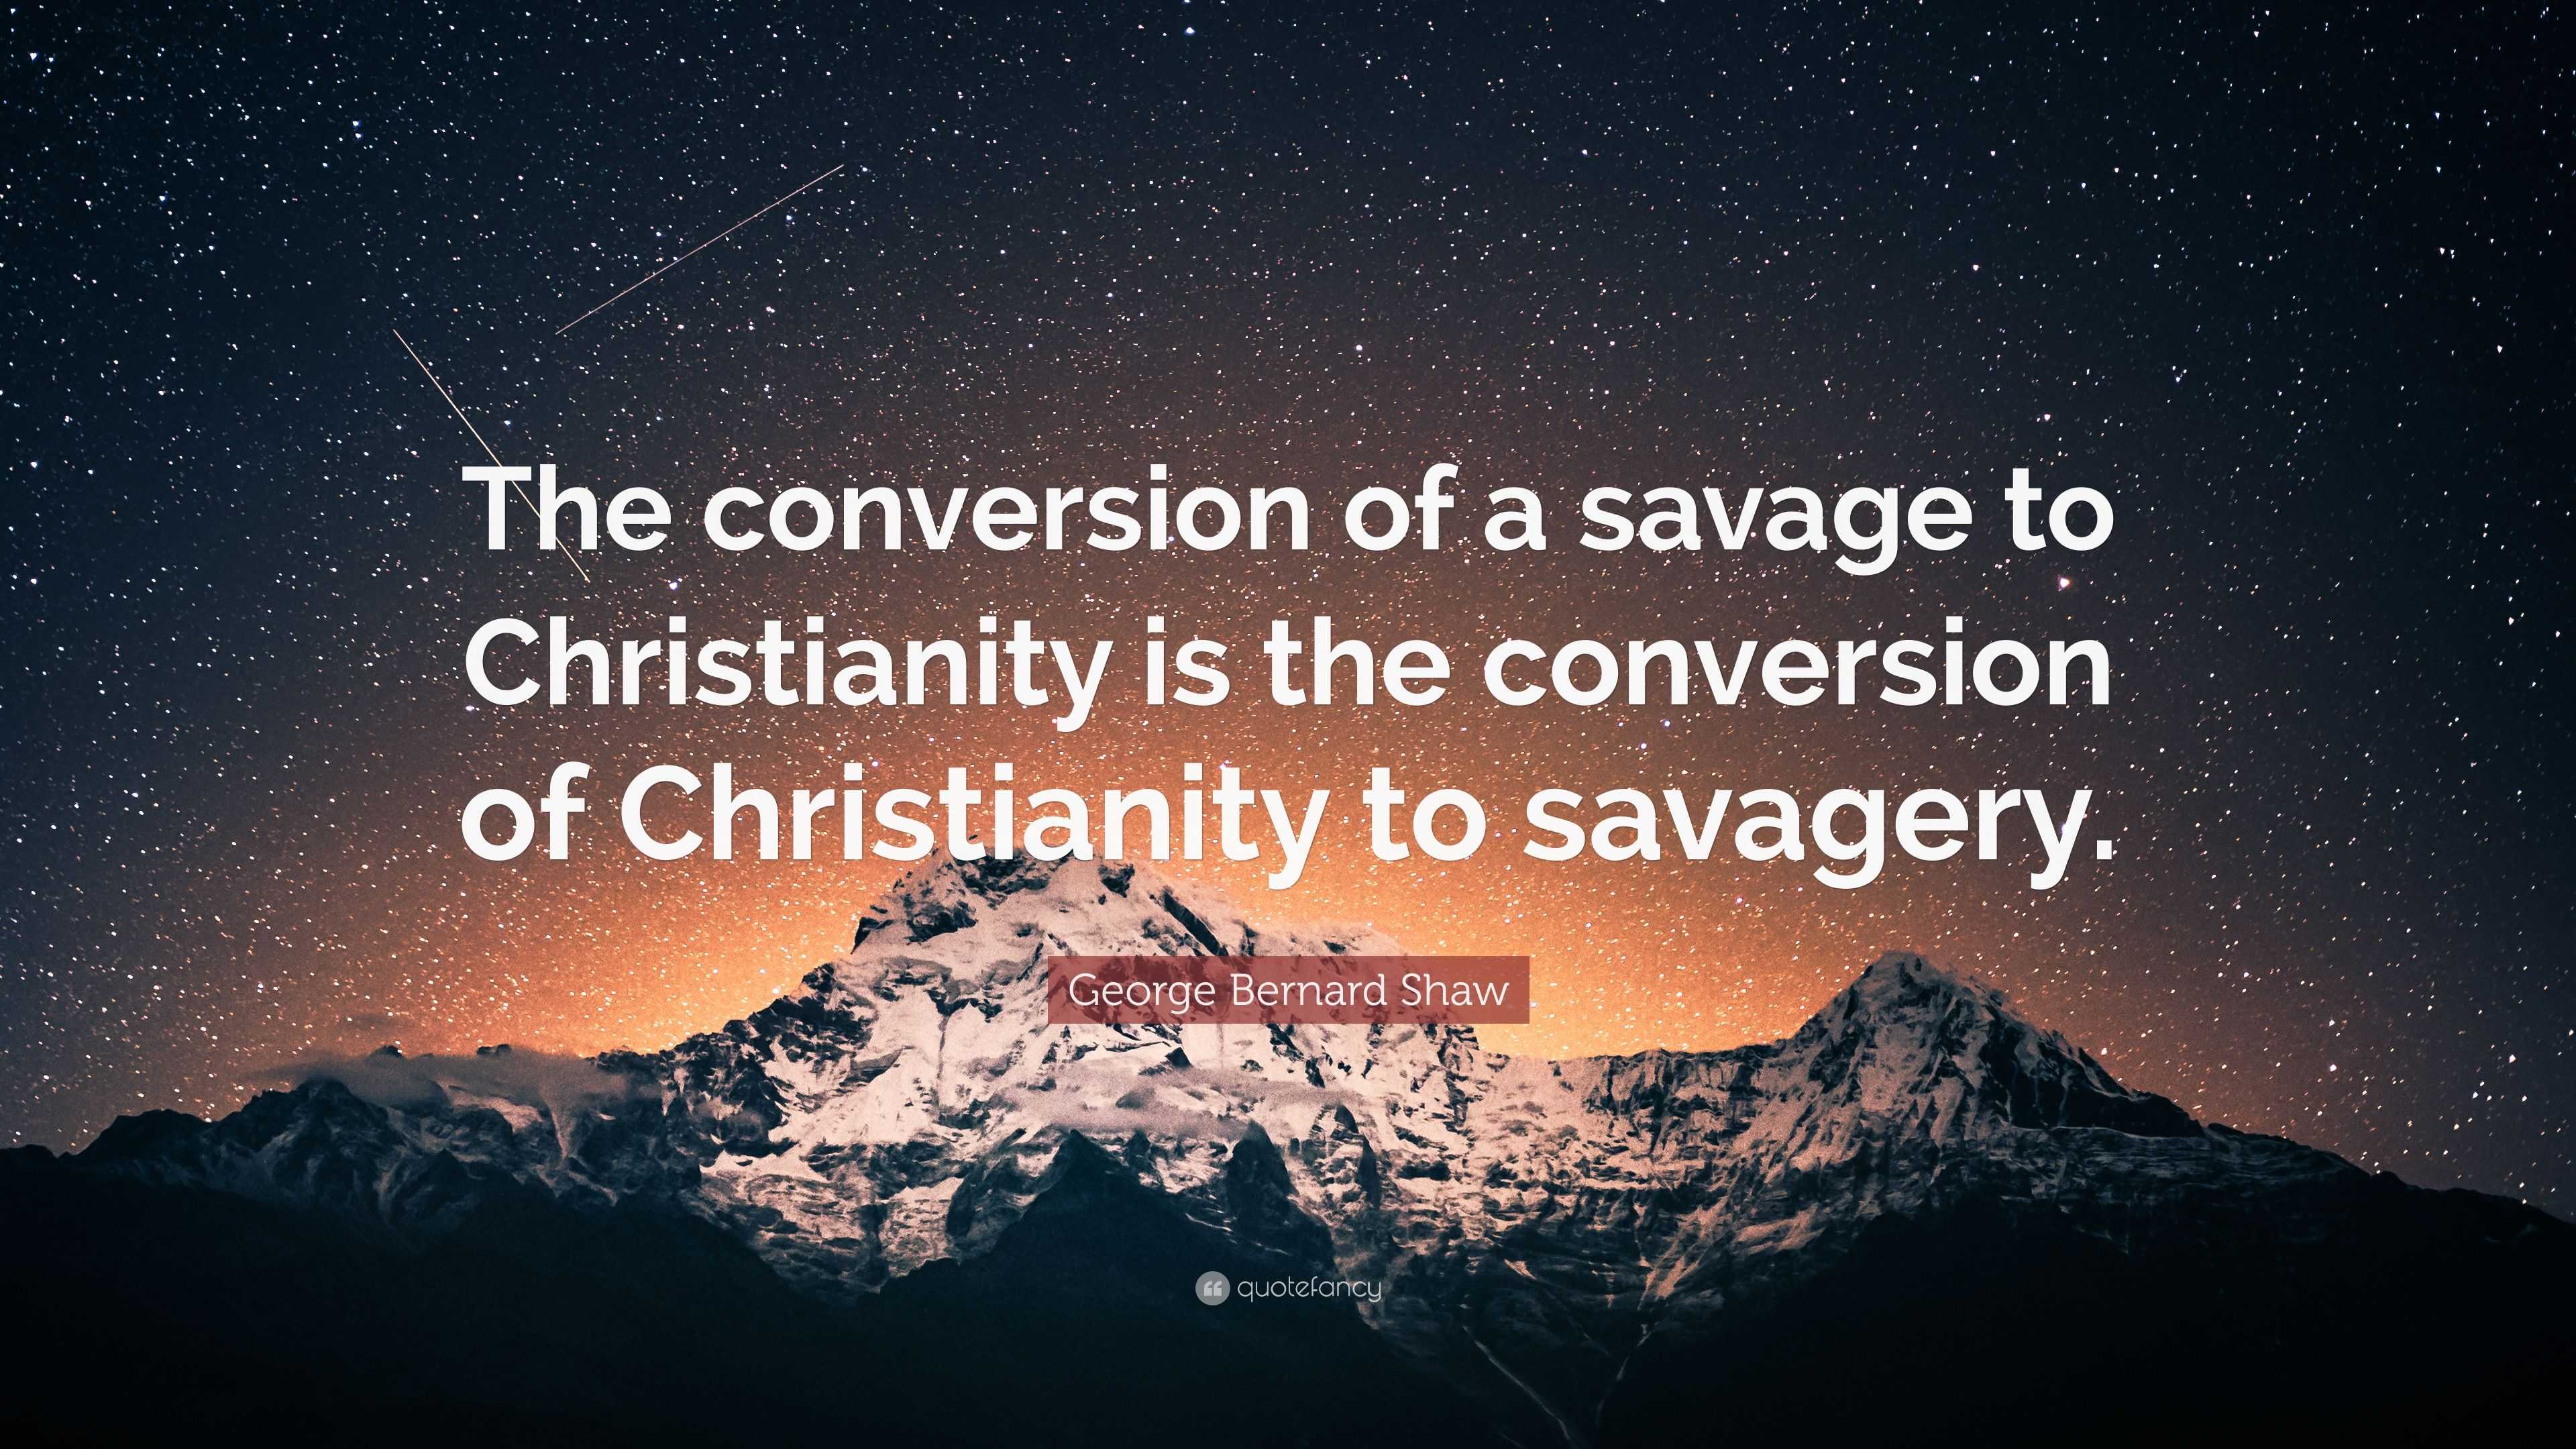 2513983 George Bernard Shaw Quote The conversion of a savage to